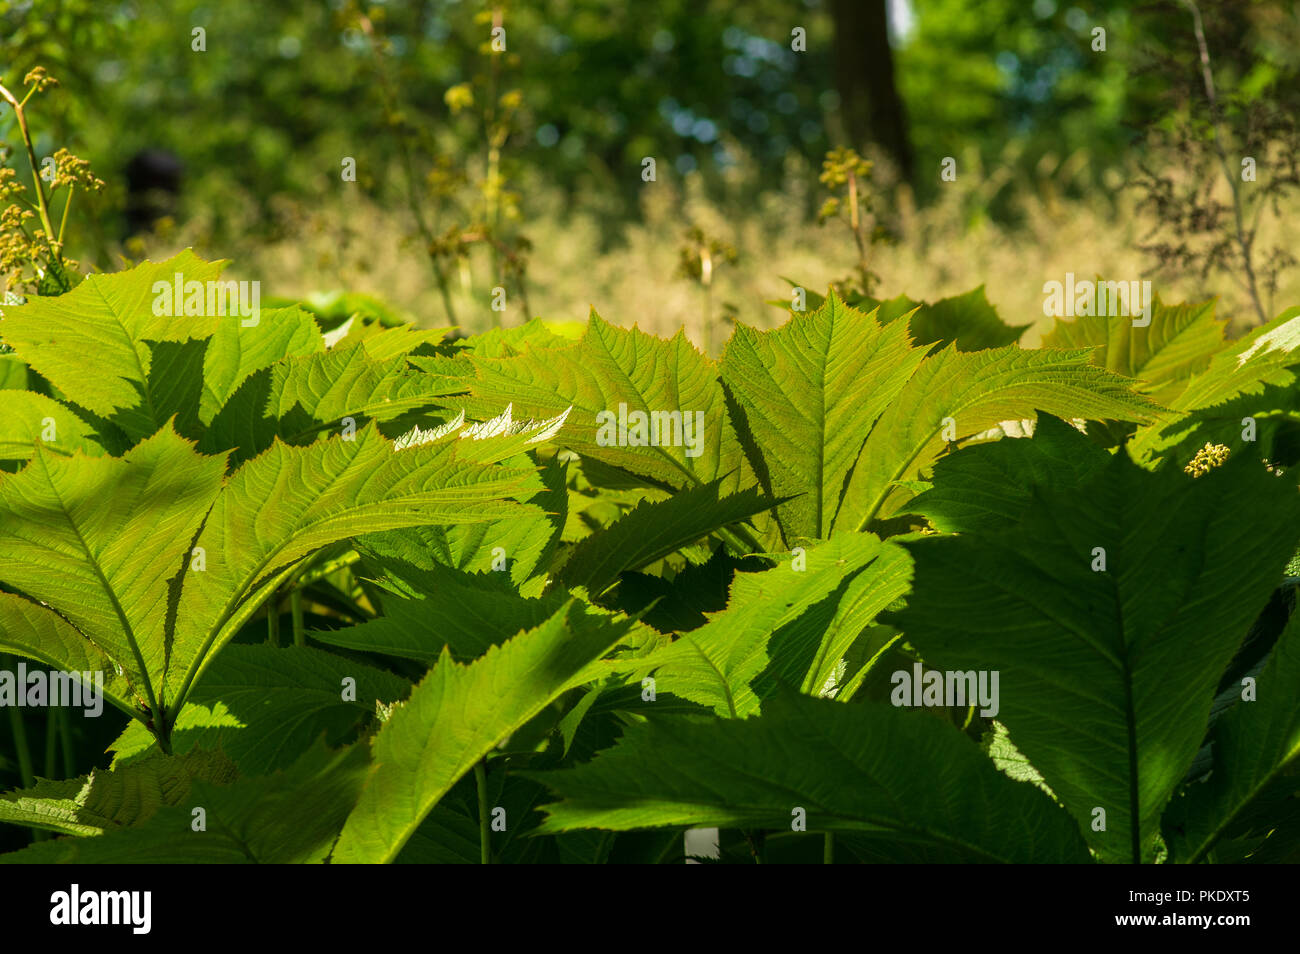 Large green leaves in the sun Stock Photo